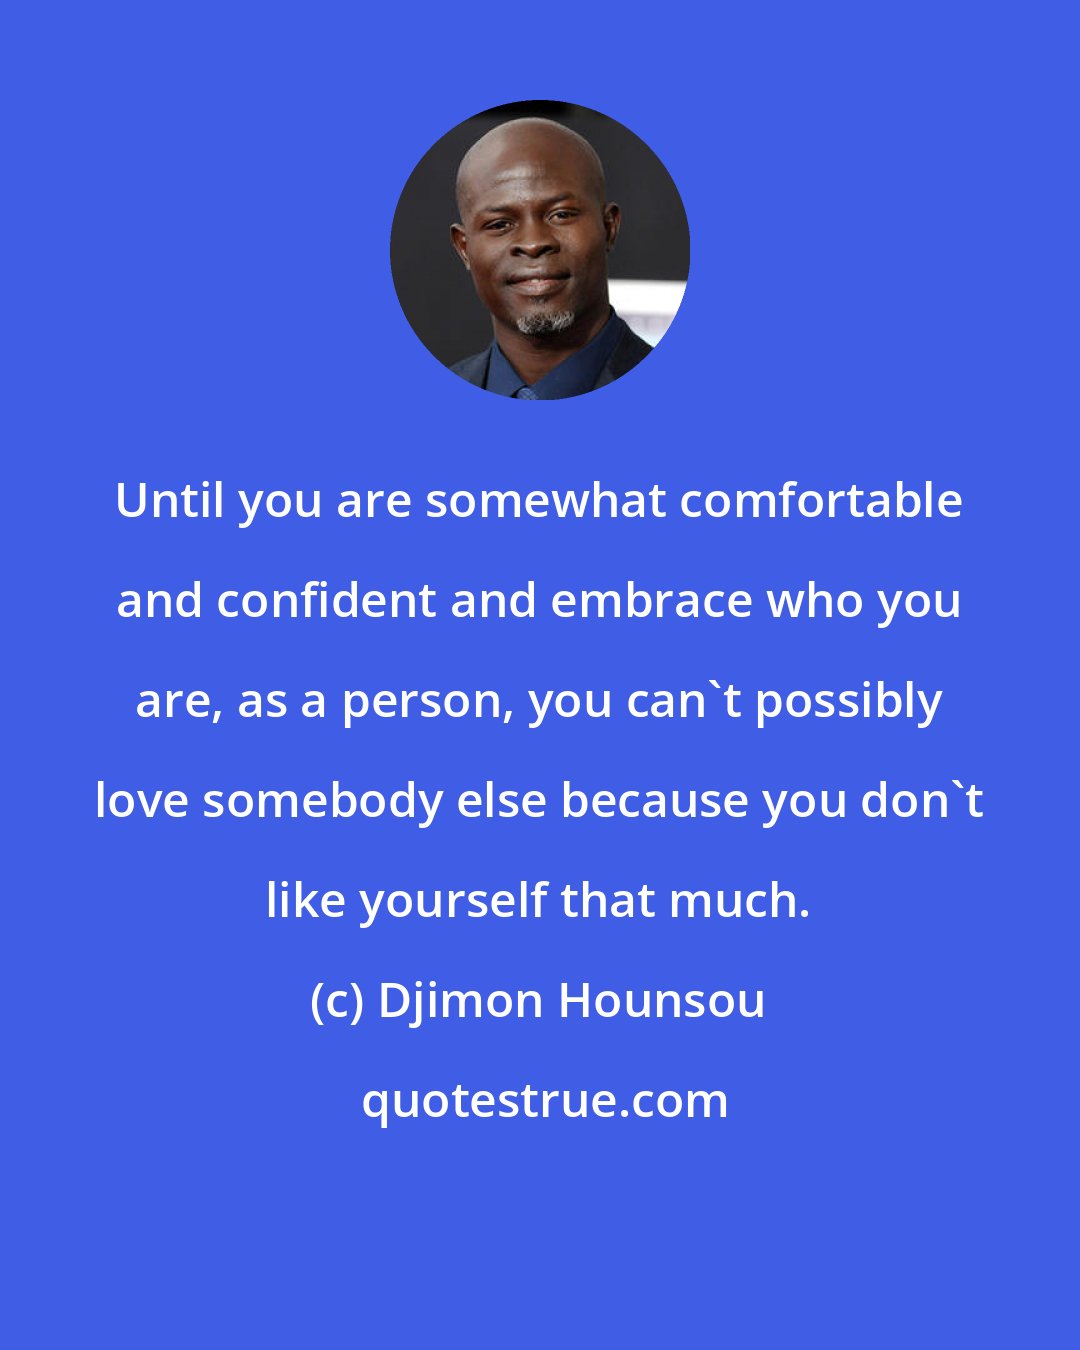 Djimon Hounsou: Until you are somewhat comfortable and confident and embrace who you are, as a person, you can't possibly love somebody else because you don't like yourself that much.